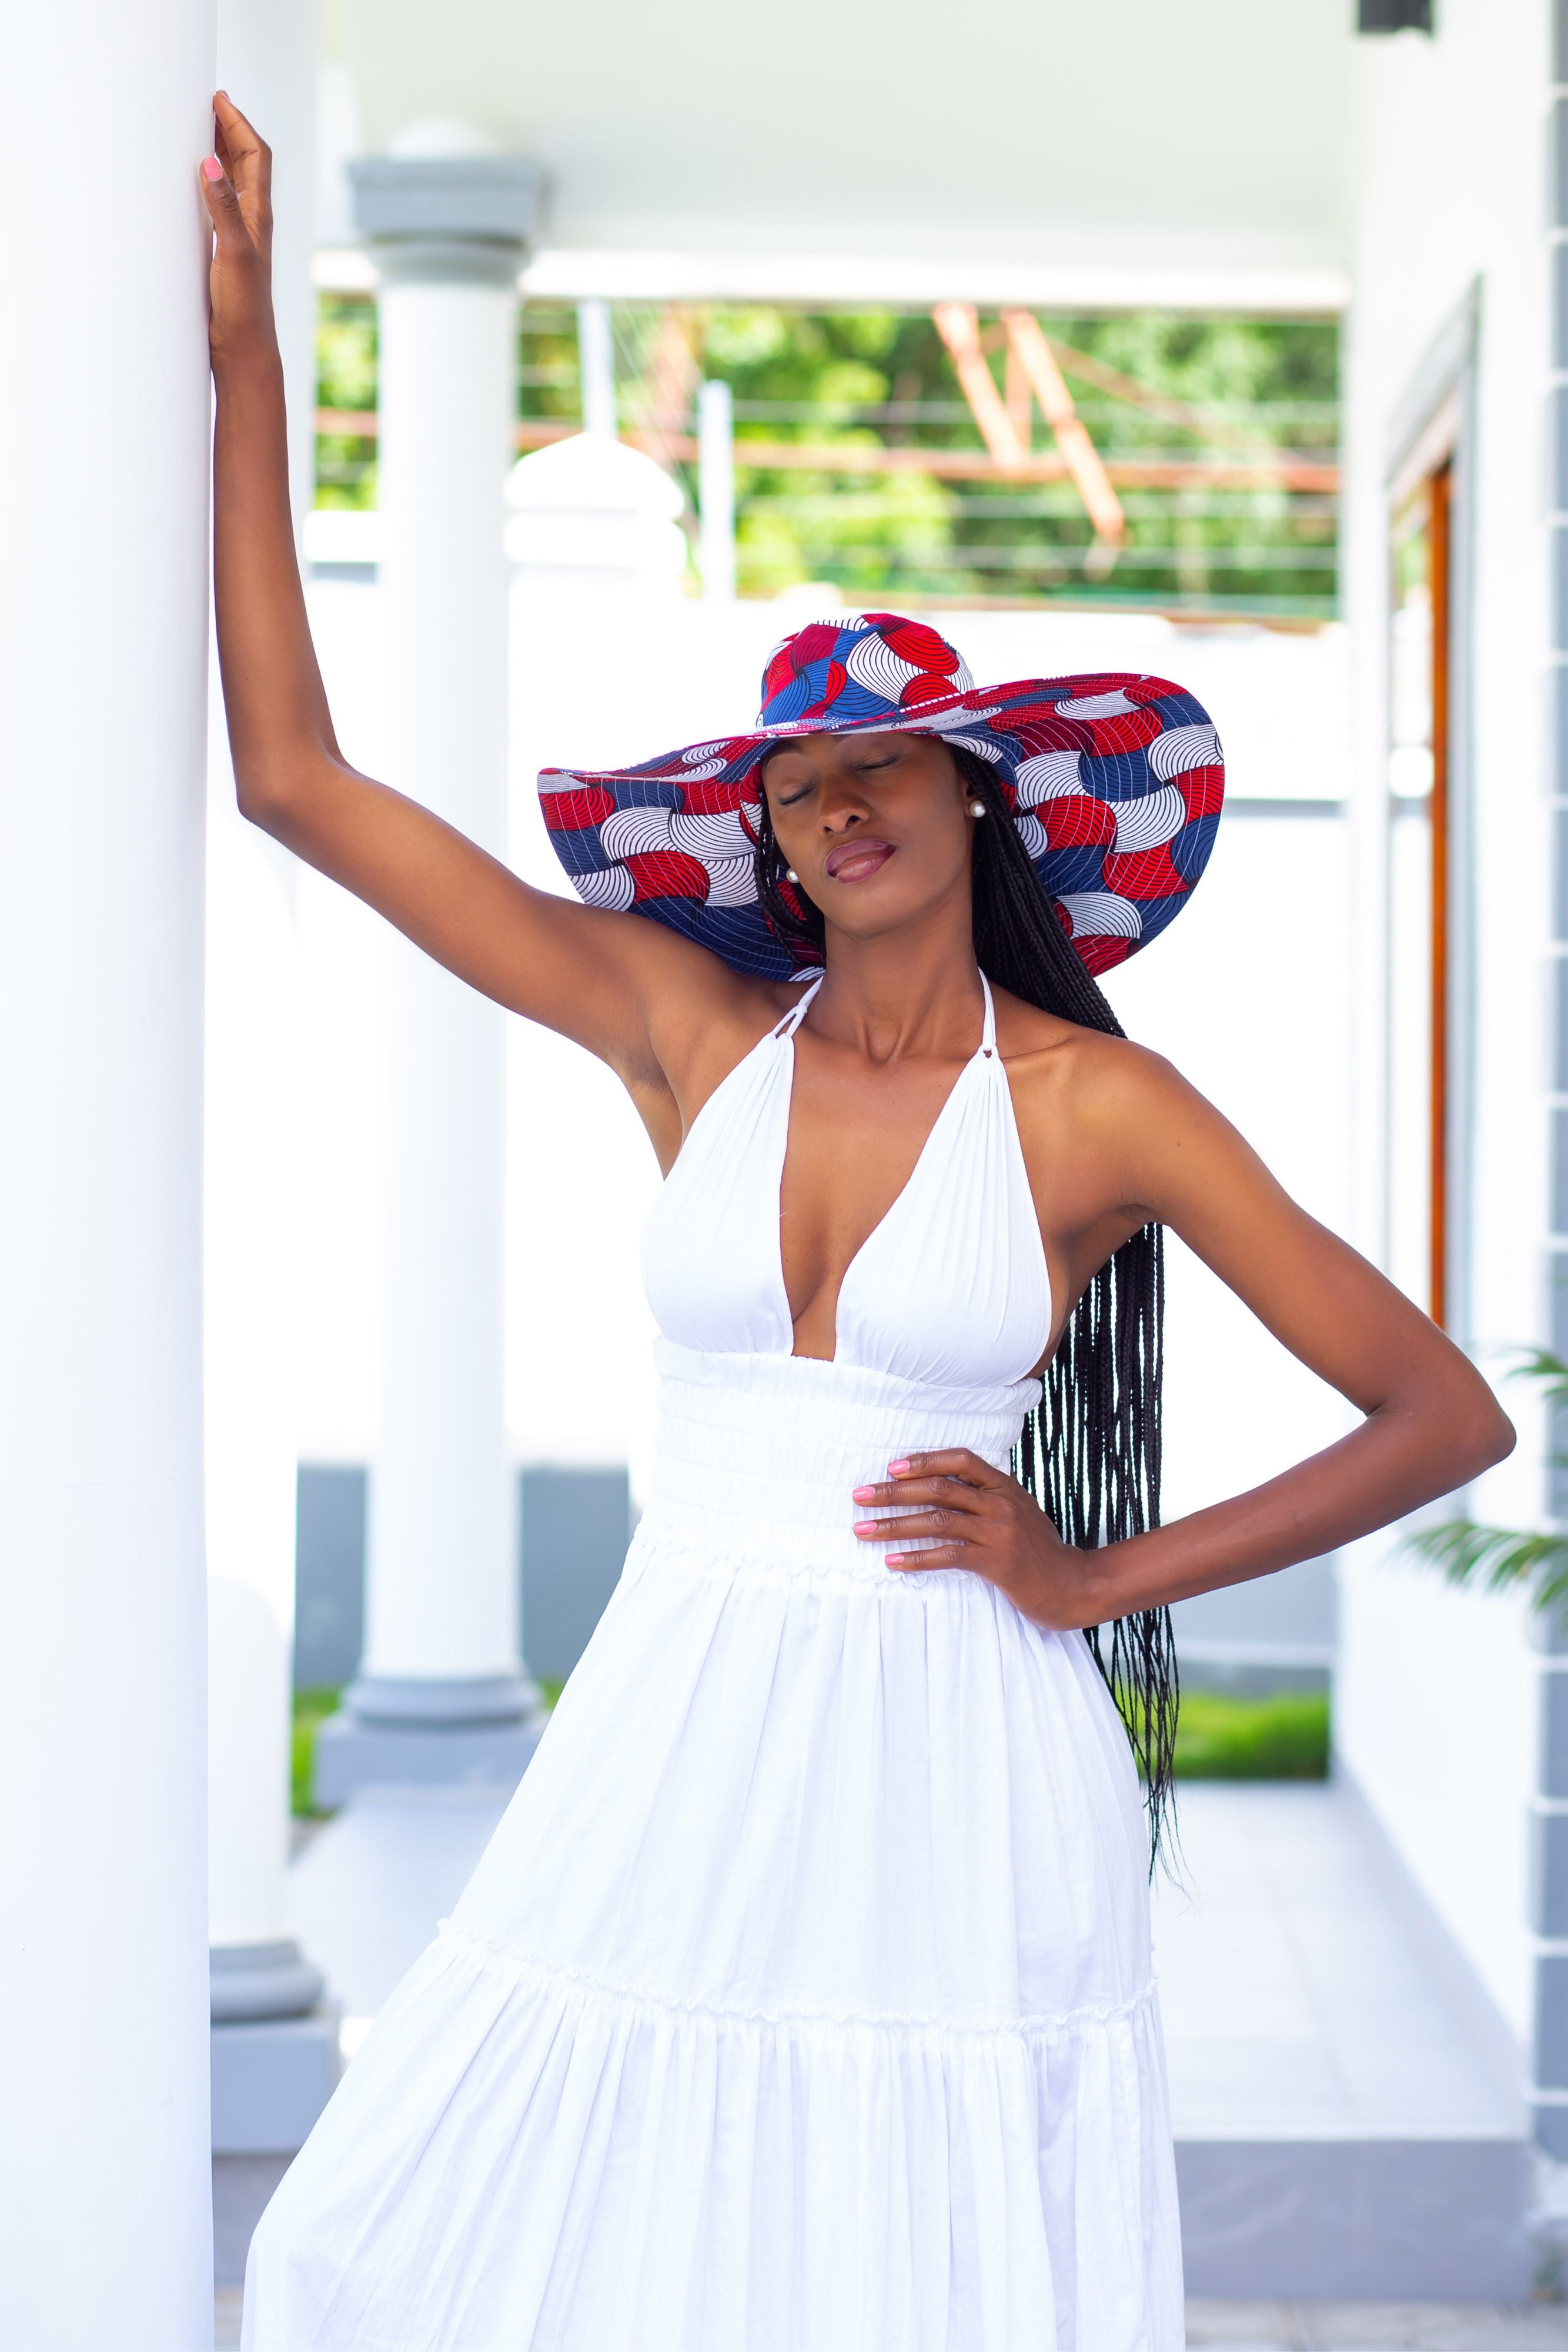 Jollo Simba  Modern African Hat: let comfort and style give you the best shade.